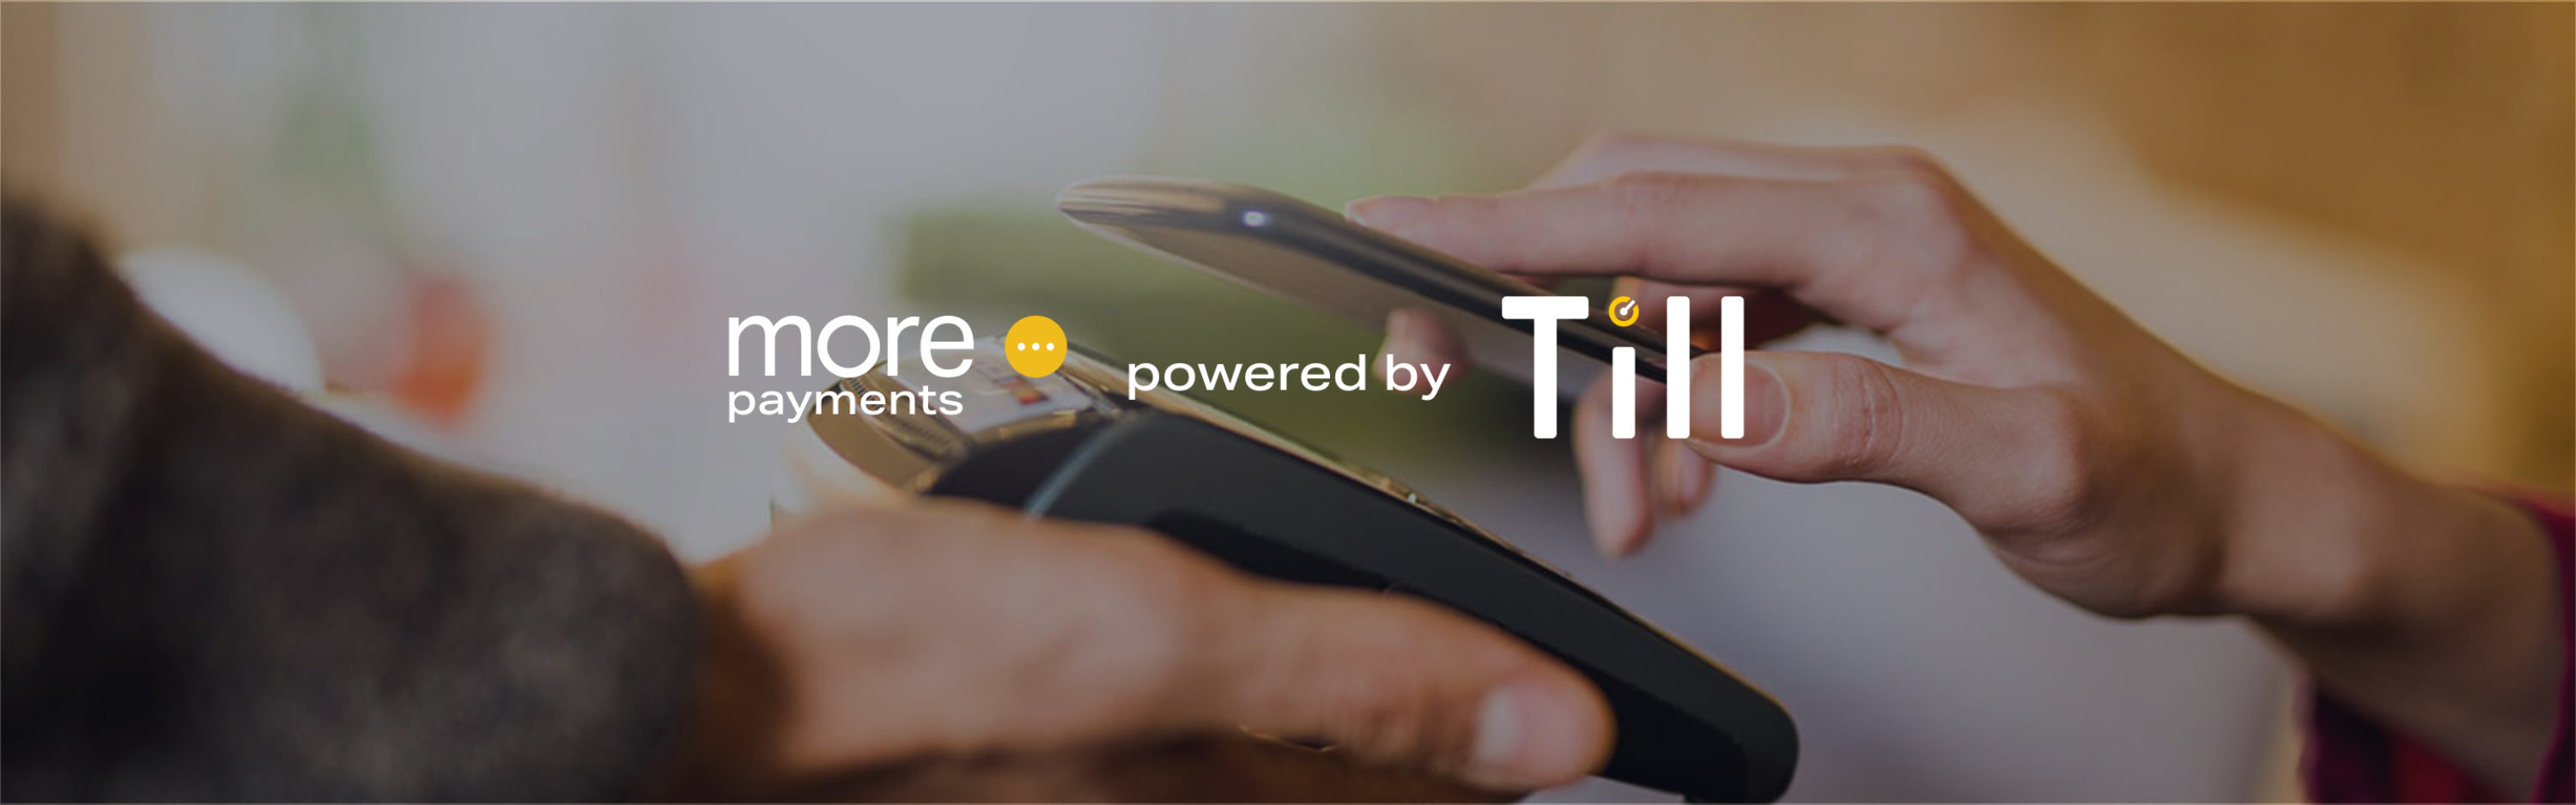 More Payments powered by Till